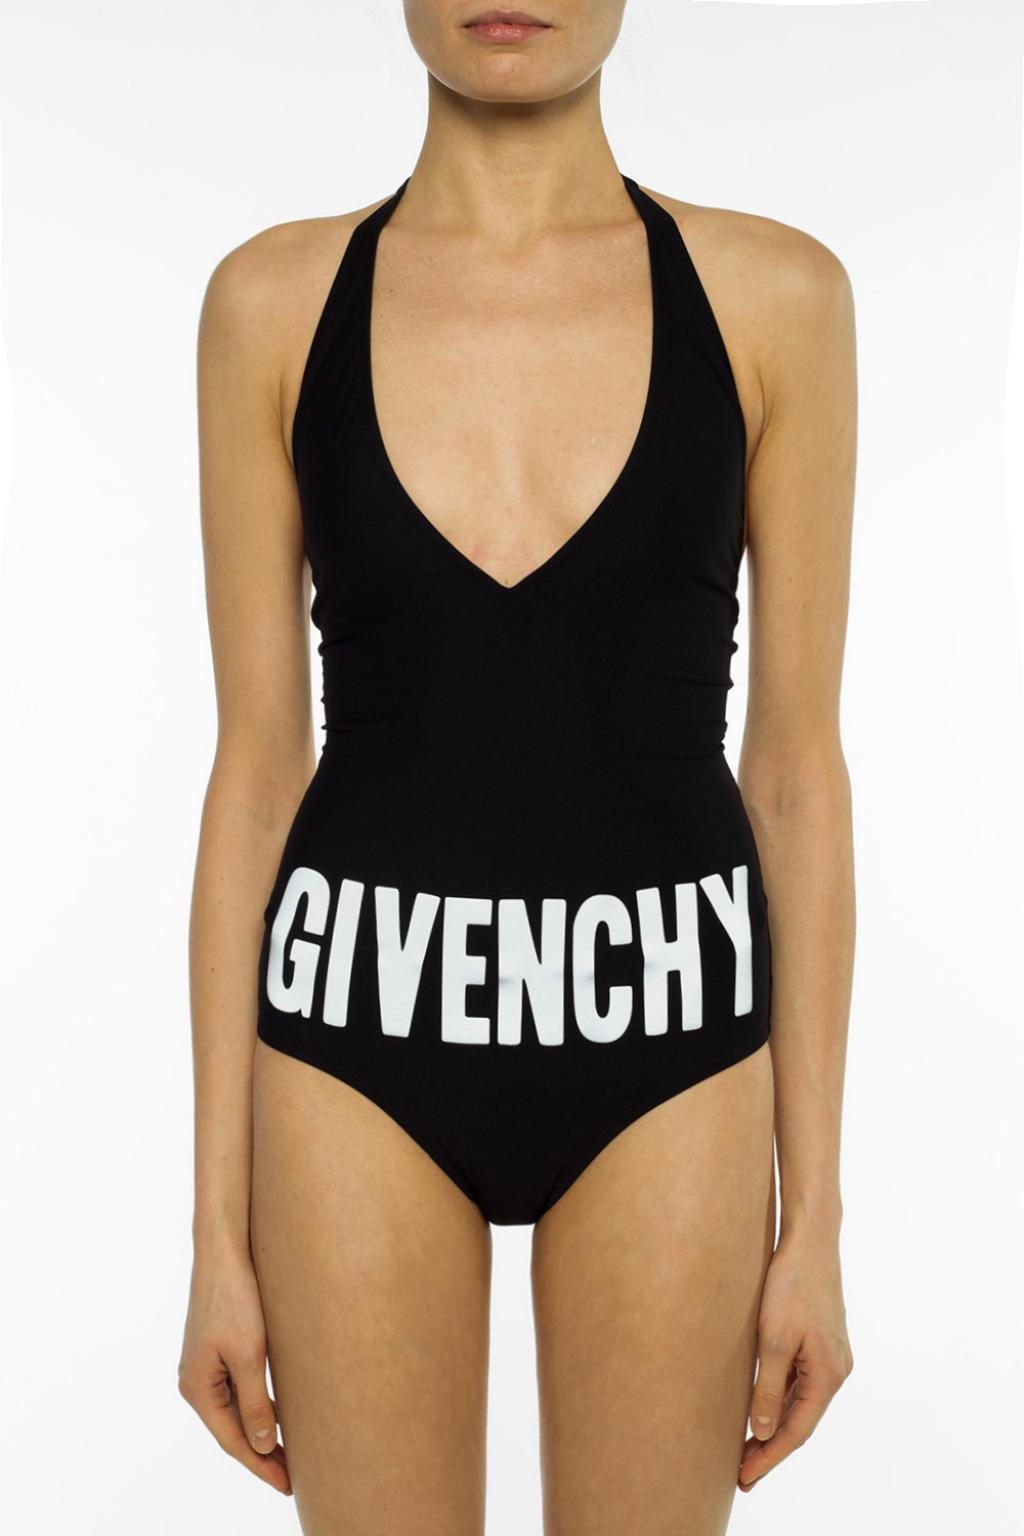 givenchy bathing suit one piece cheap 